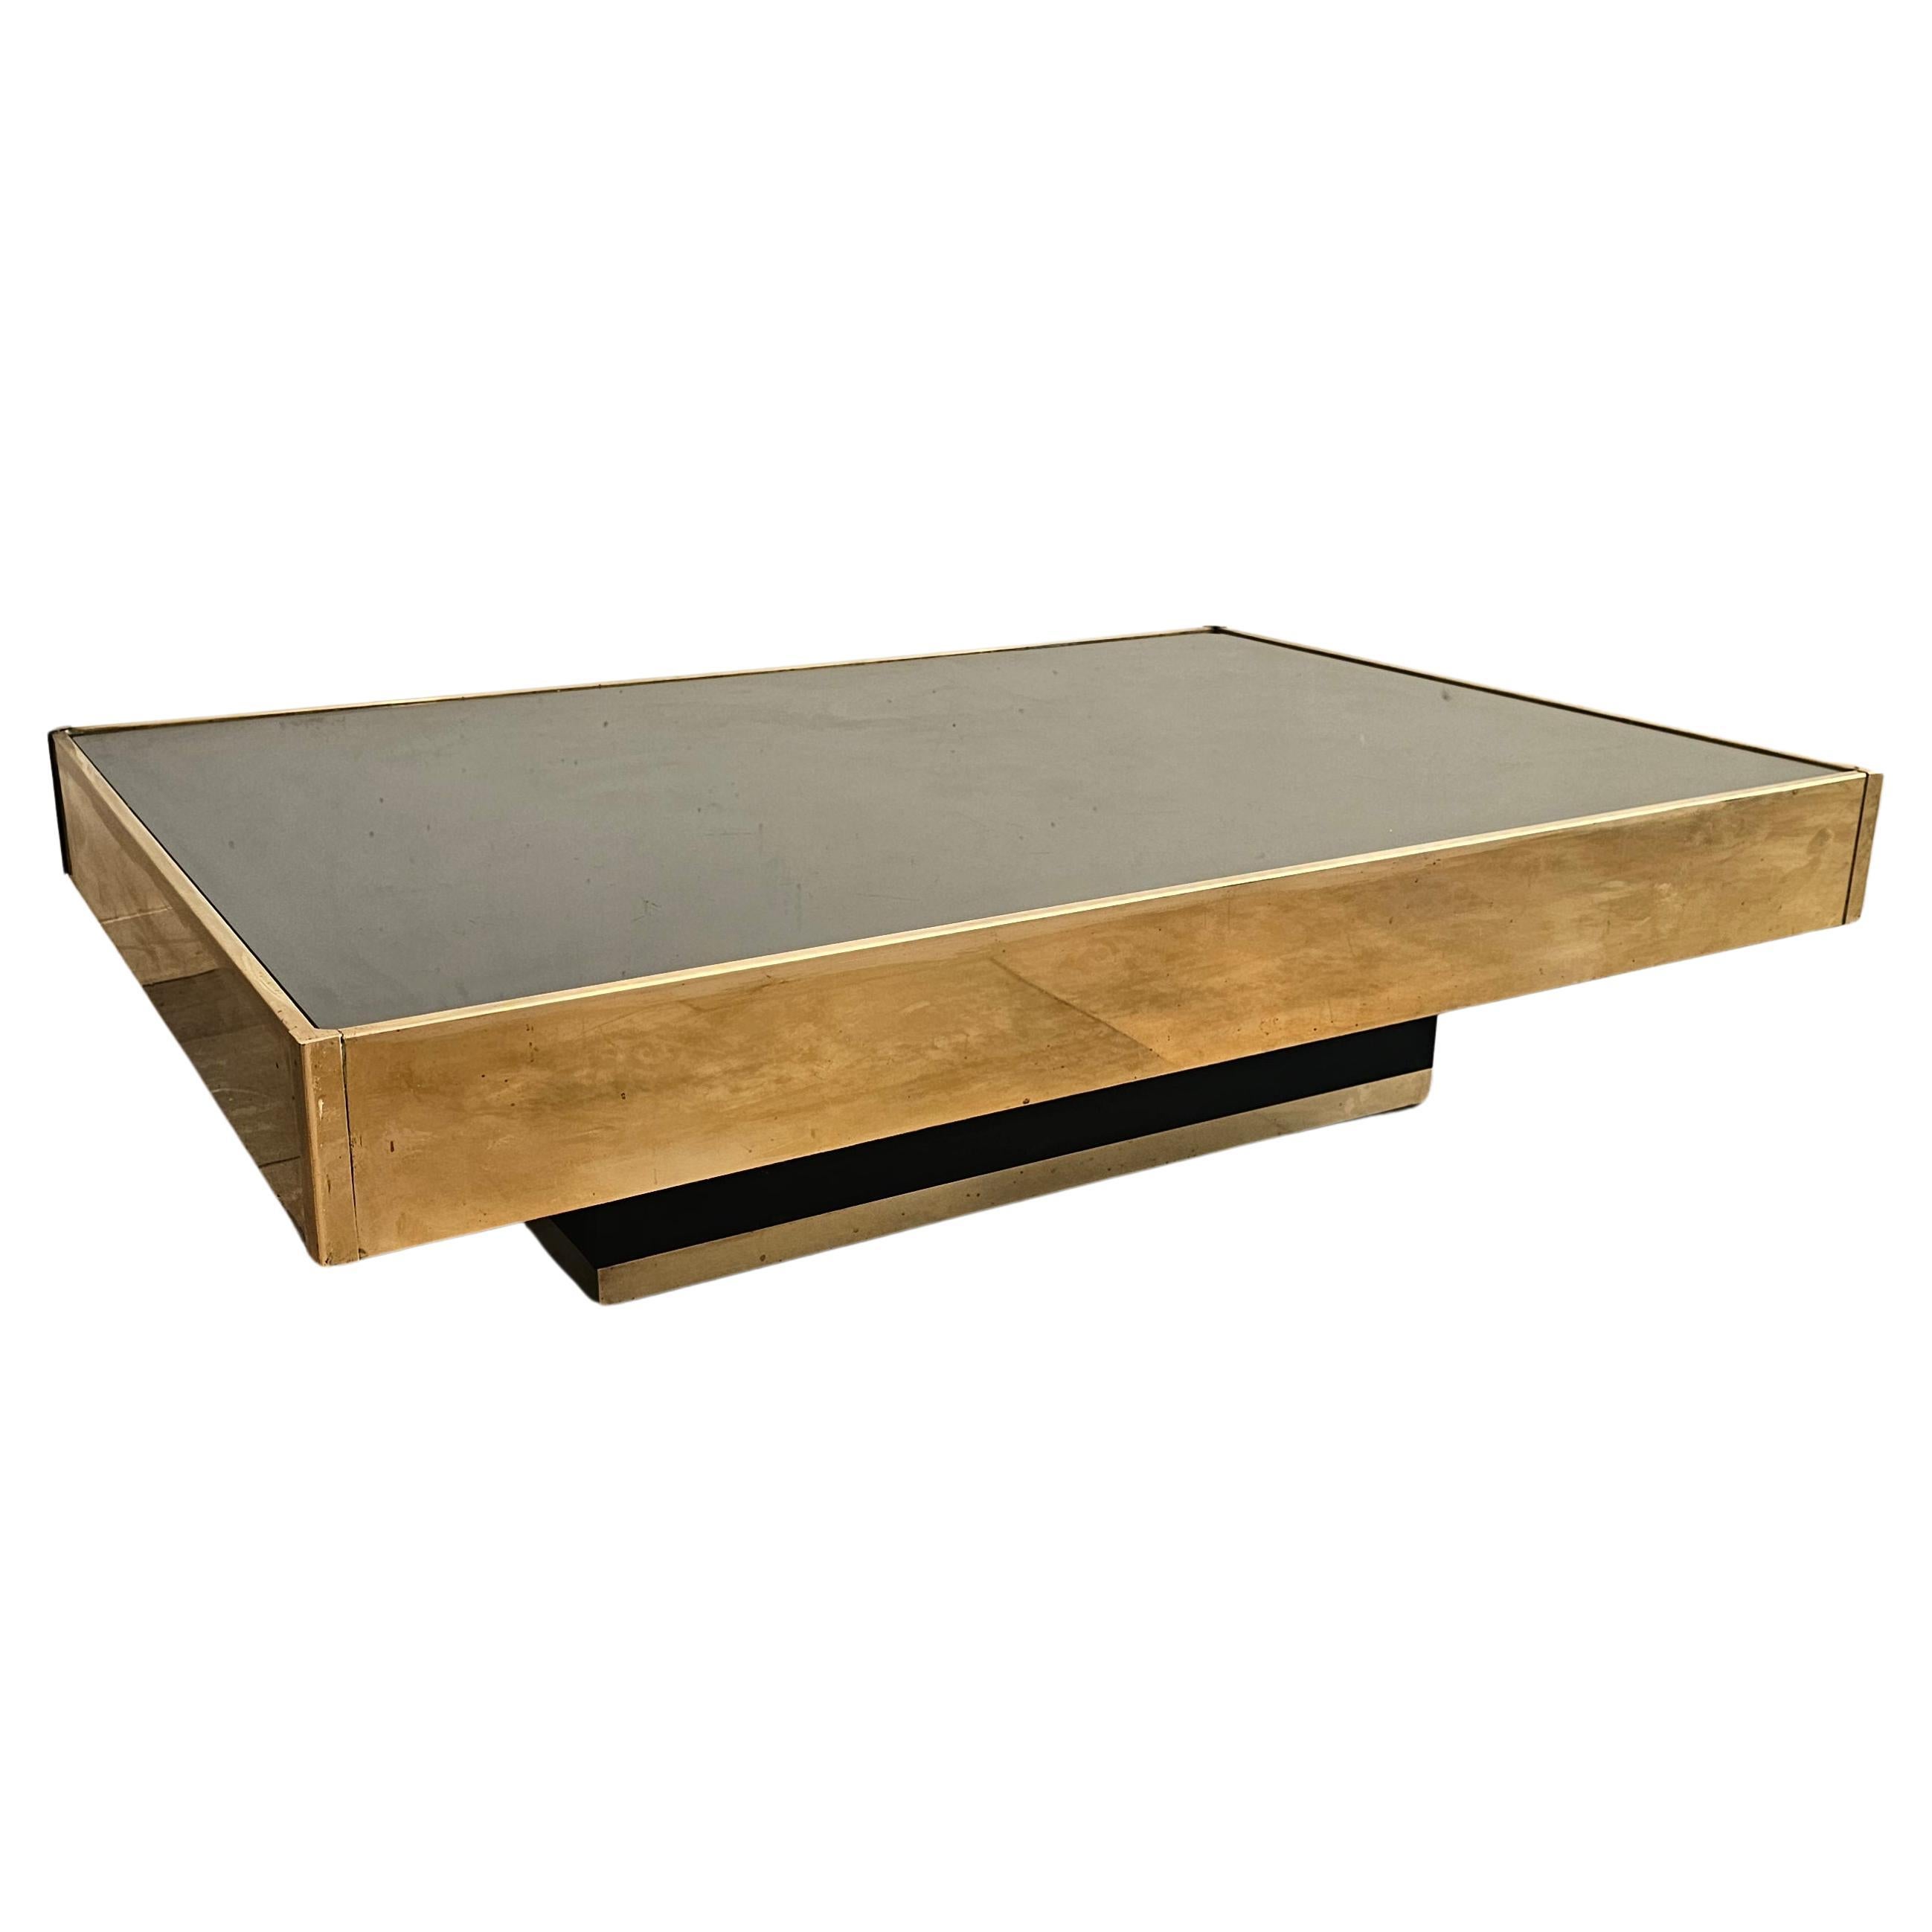 Square Mirorred coffeetable by "Willy Rizzo" for "Cidue" with Brass Details For Sale